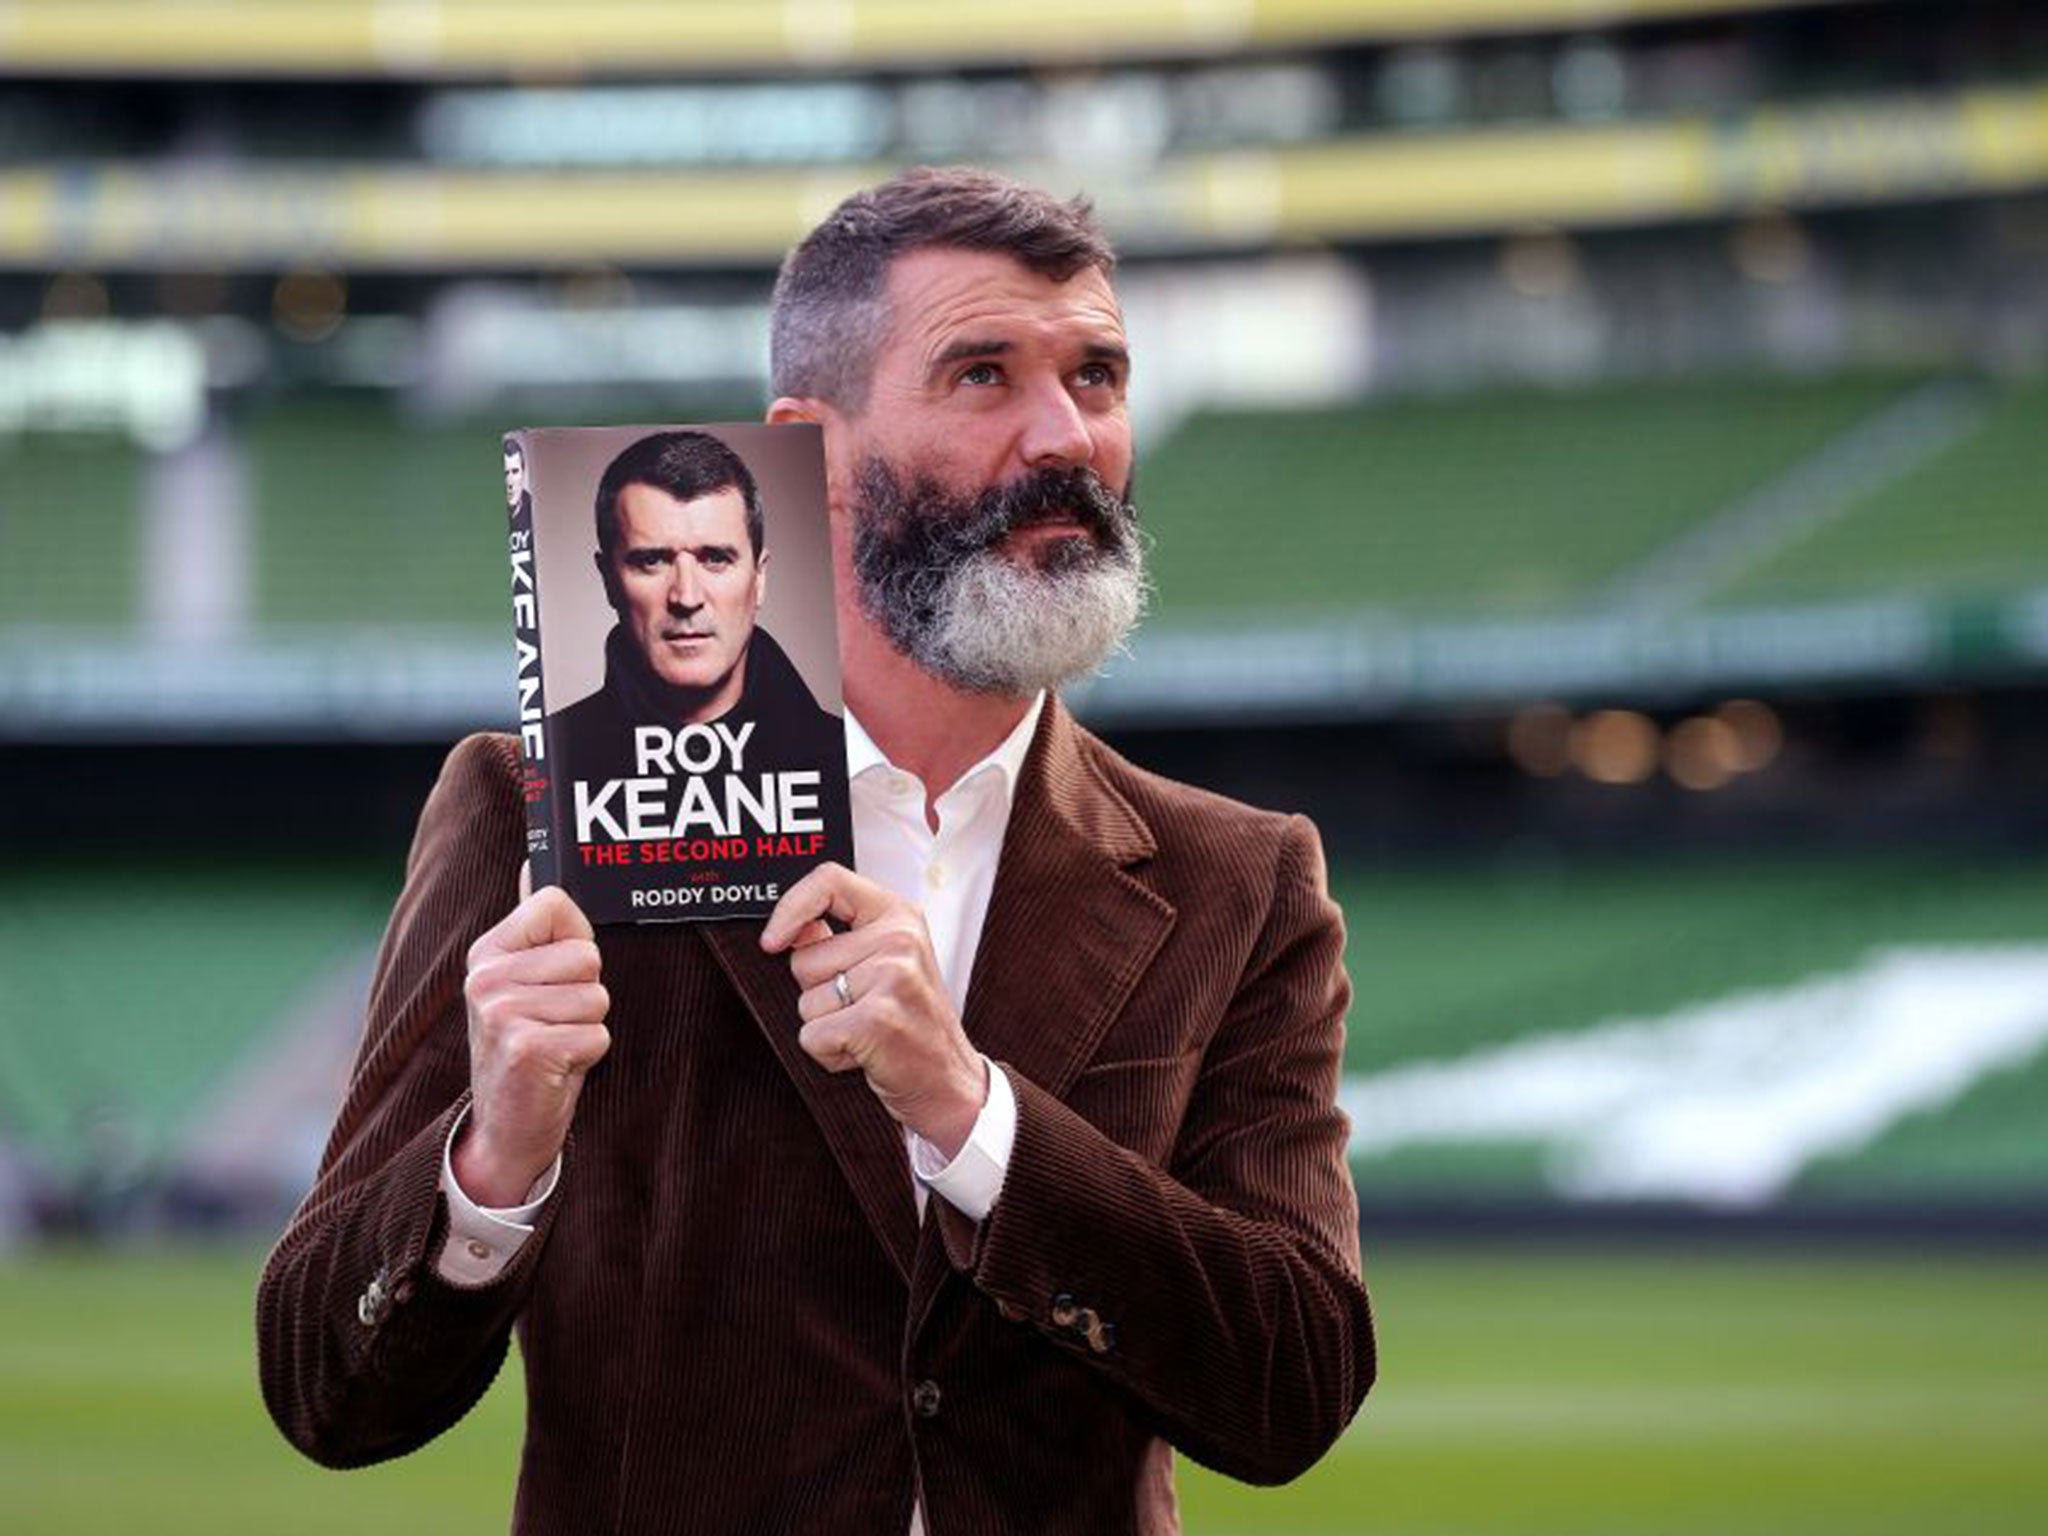 Roy Keane during the book launch at the Aviva Stadium, Dublin, today